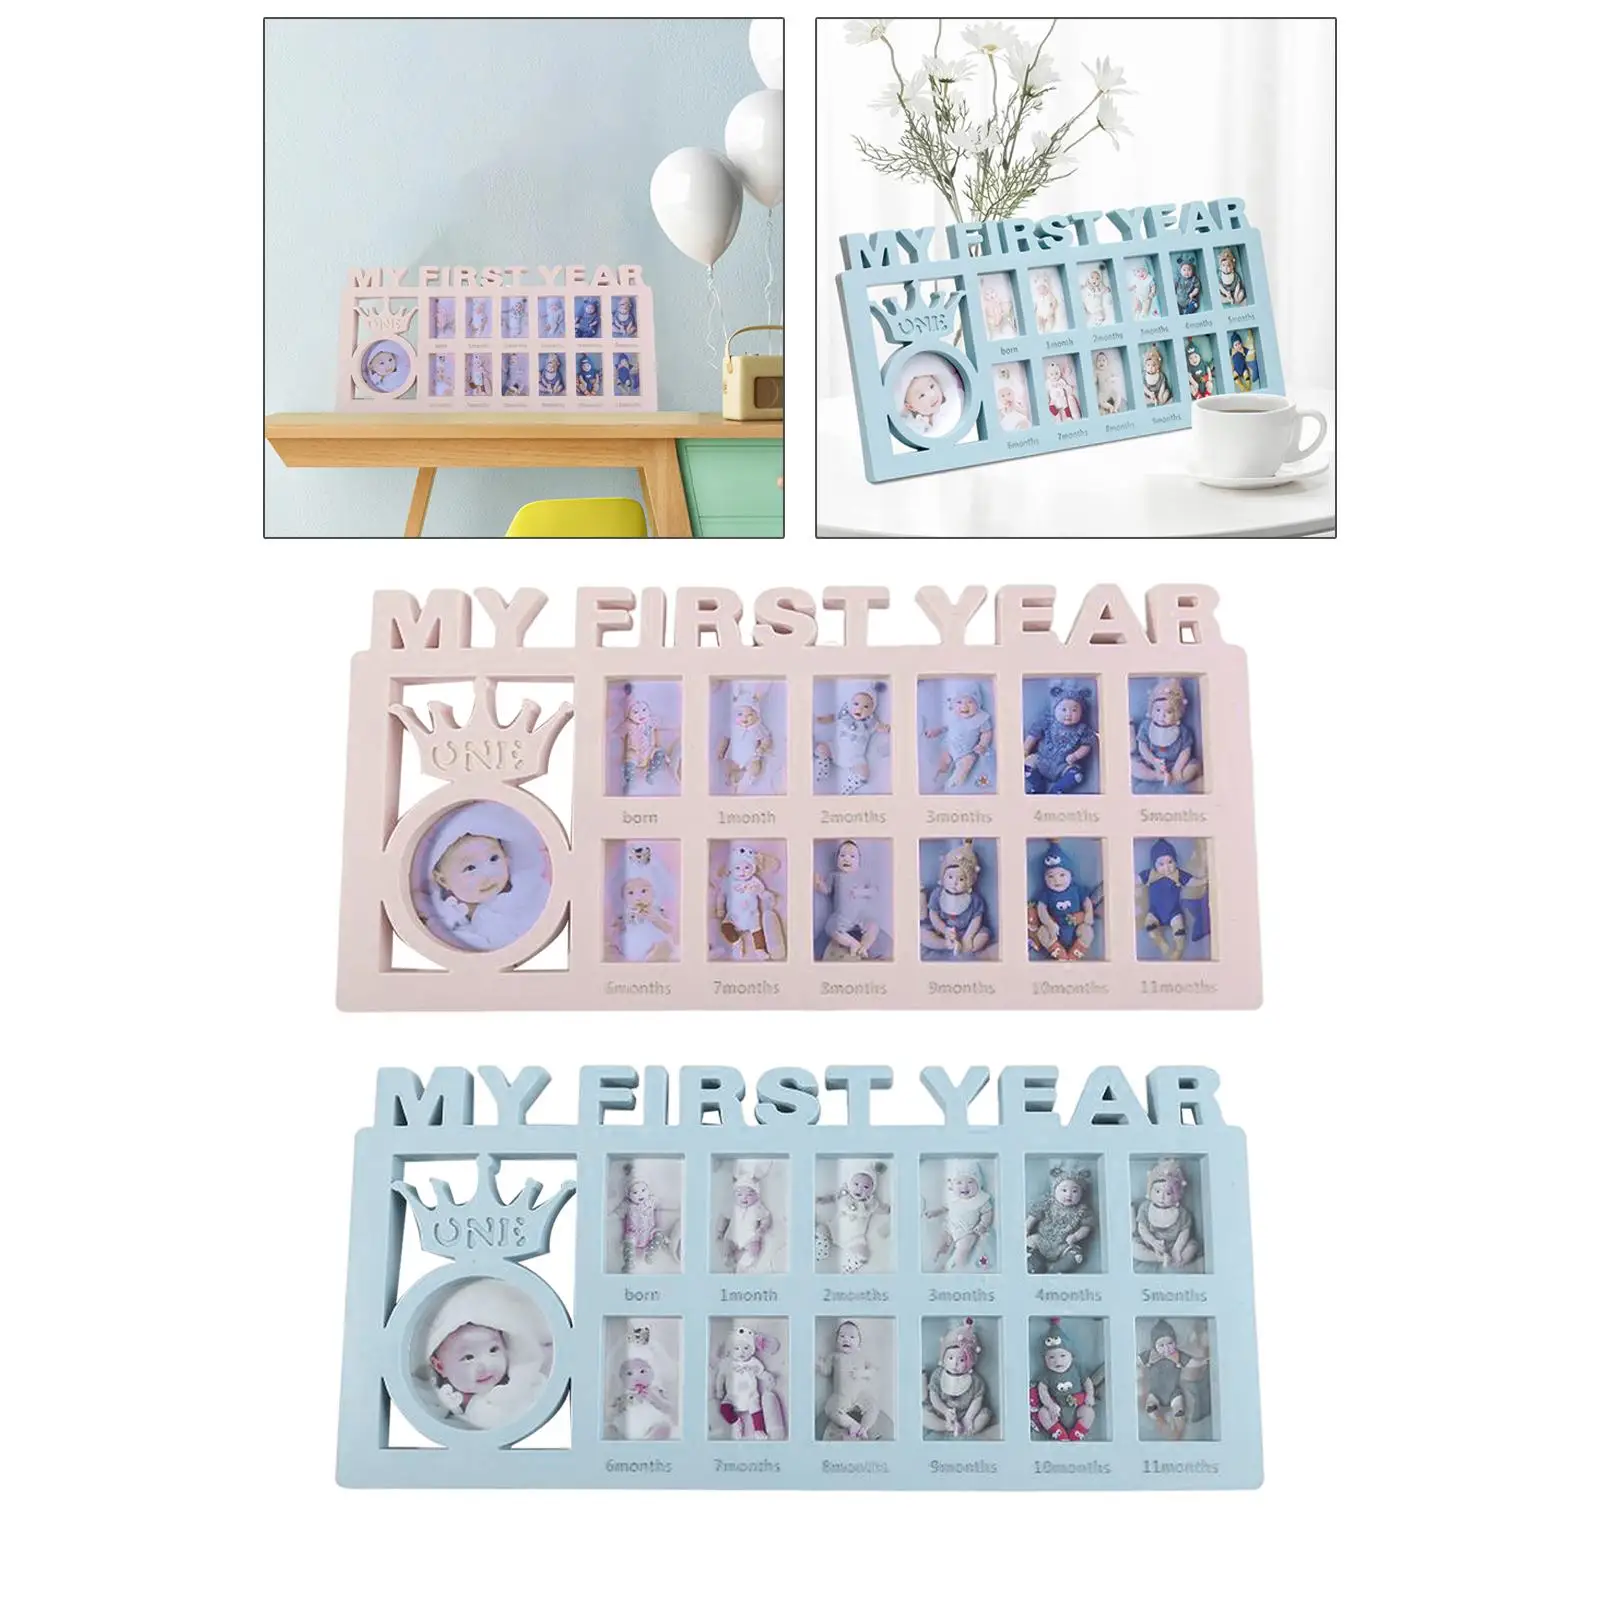   Year Photo Frame Photographs Albums Infant 12 Month Picture Frame